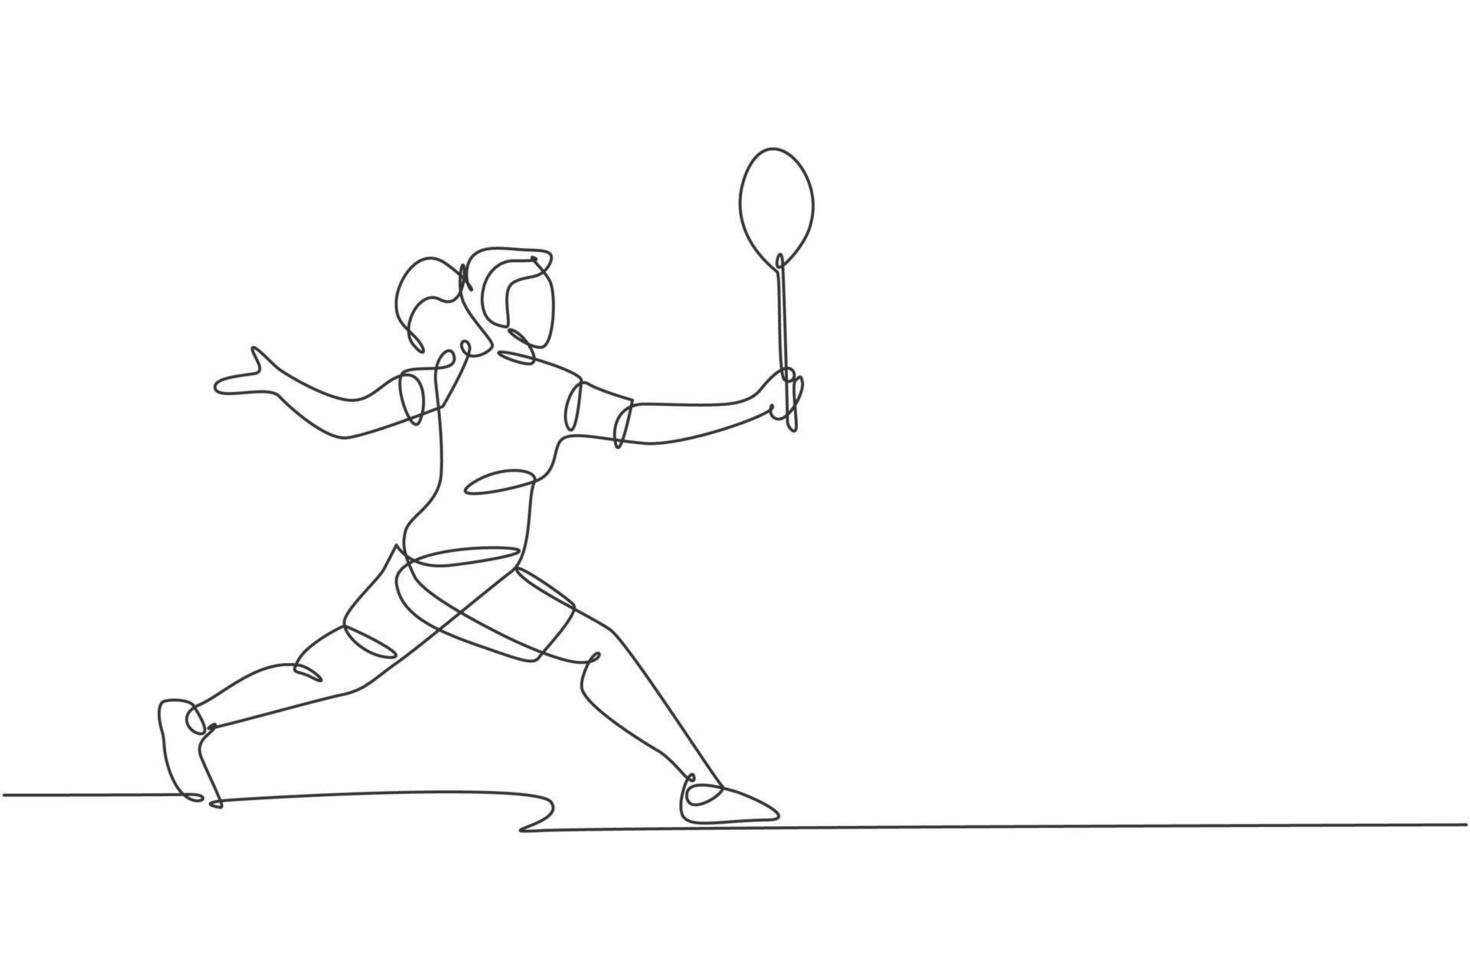 One single line drawing of young energetic badminton player defense to take opponent hit vector illustration. Healthy sport concept. Modern continuous line draw design for badminton tournament poster